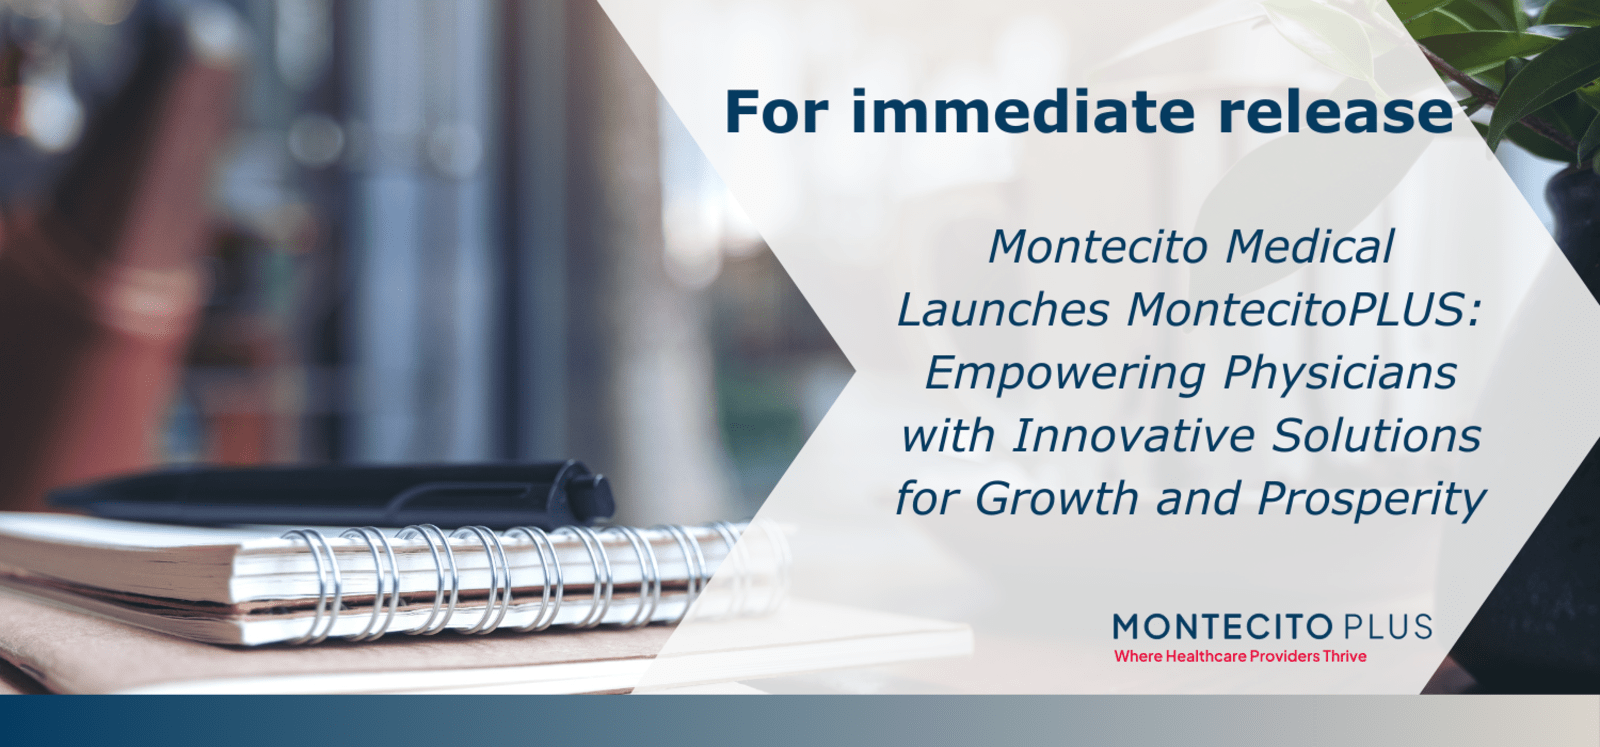 Montecito Medical Launches MontecitoPLUS: Empowering Physicians with Innovative Solutions for Growth and Prosperity